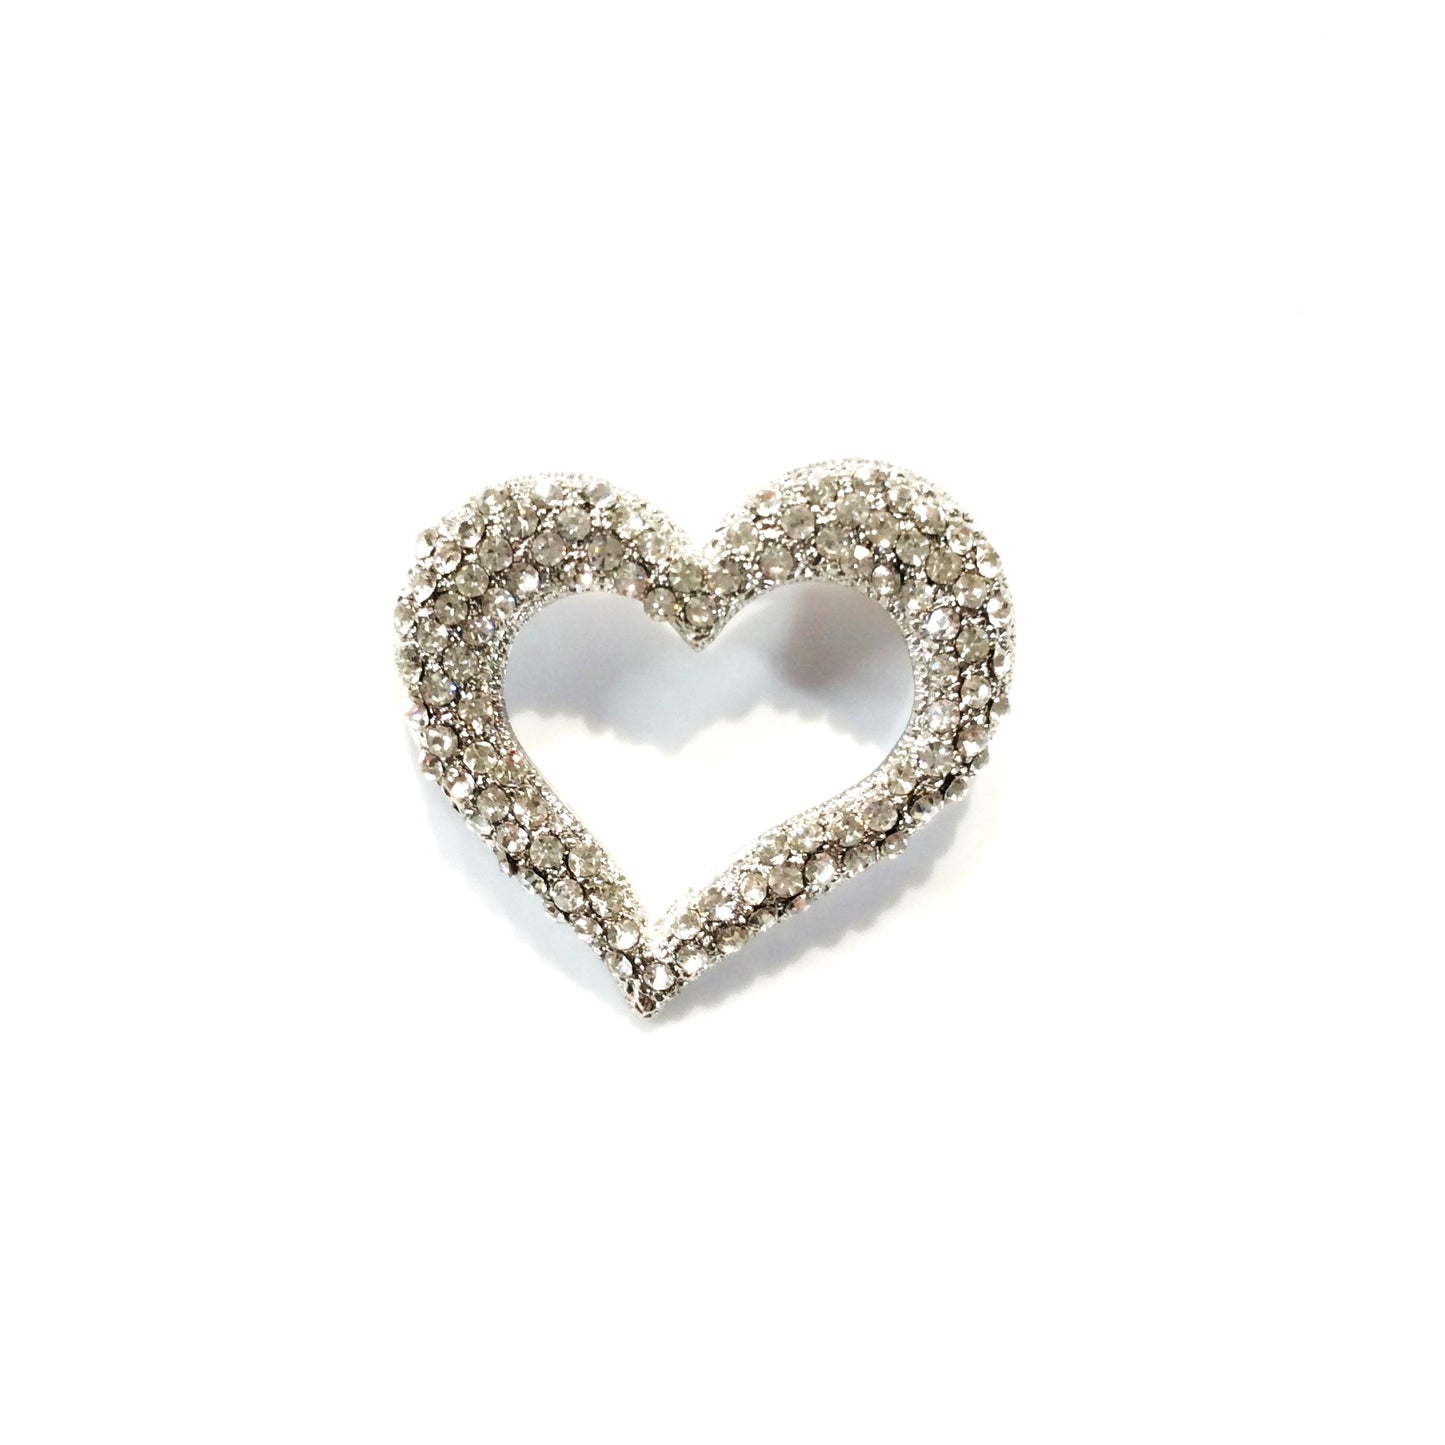 Heart Pin #66-69091CL (Clear)